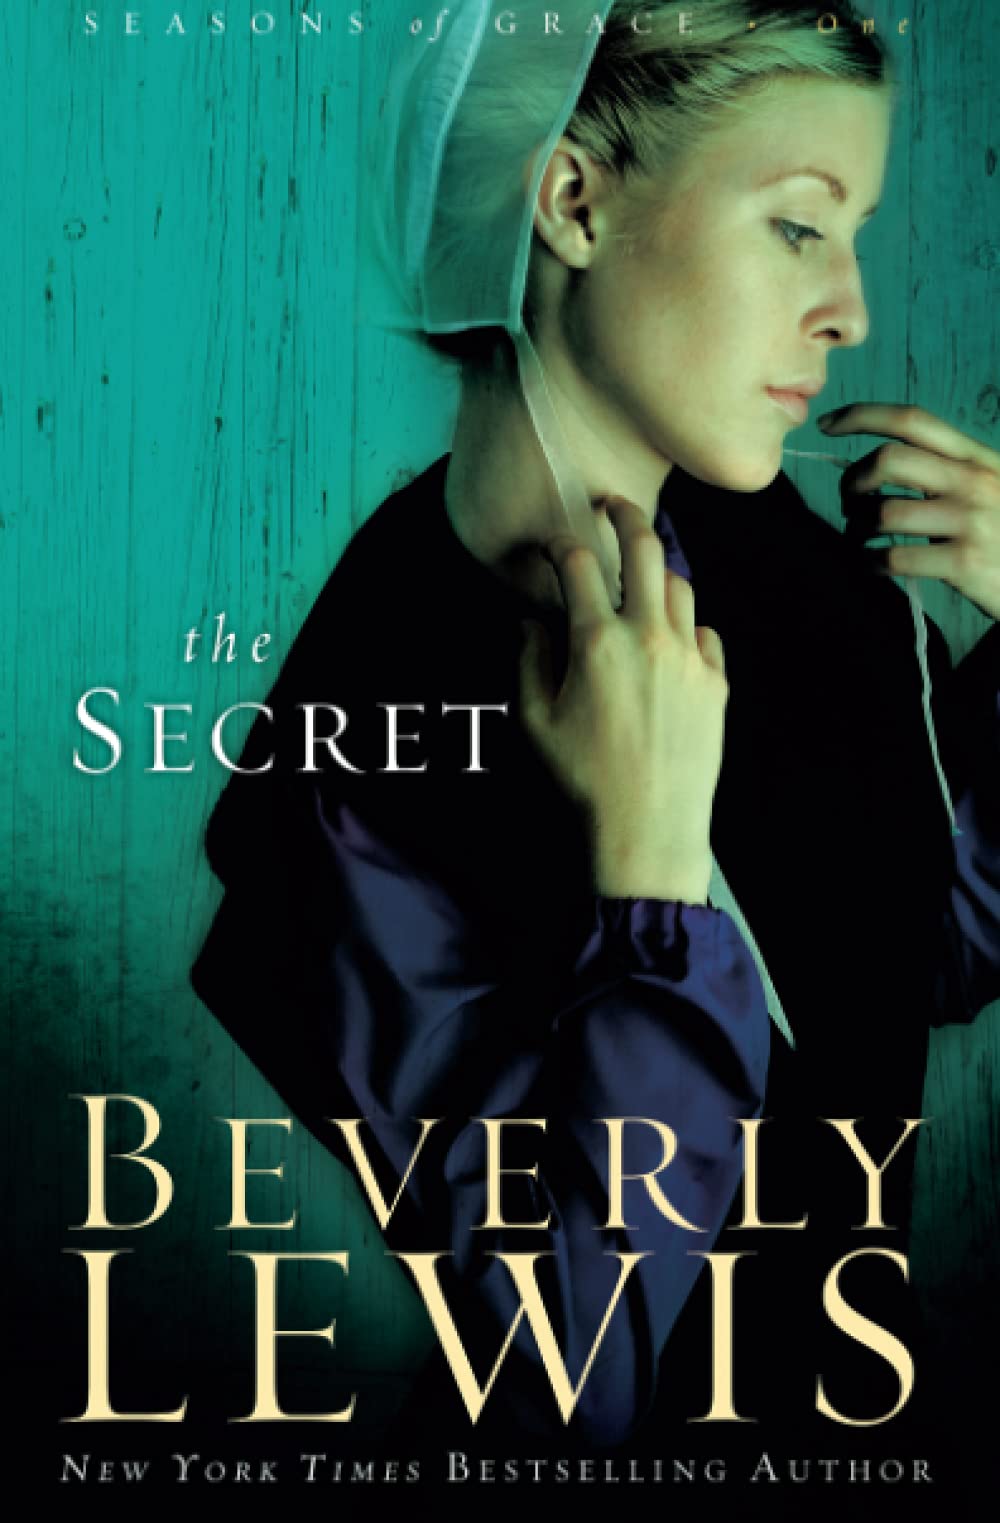 The Secret : Seasons of Grace, Book 1 of 3 (Paperback) Beverly Lewis